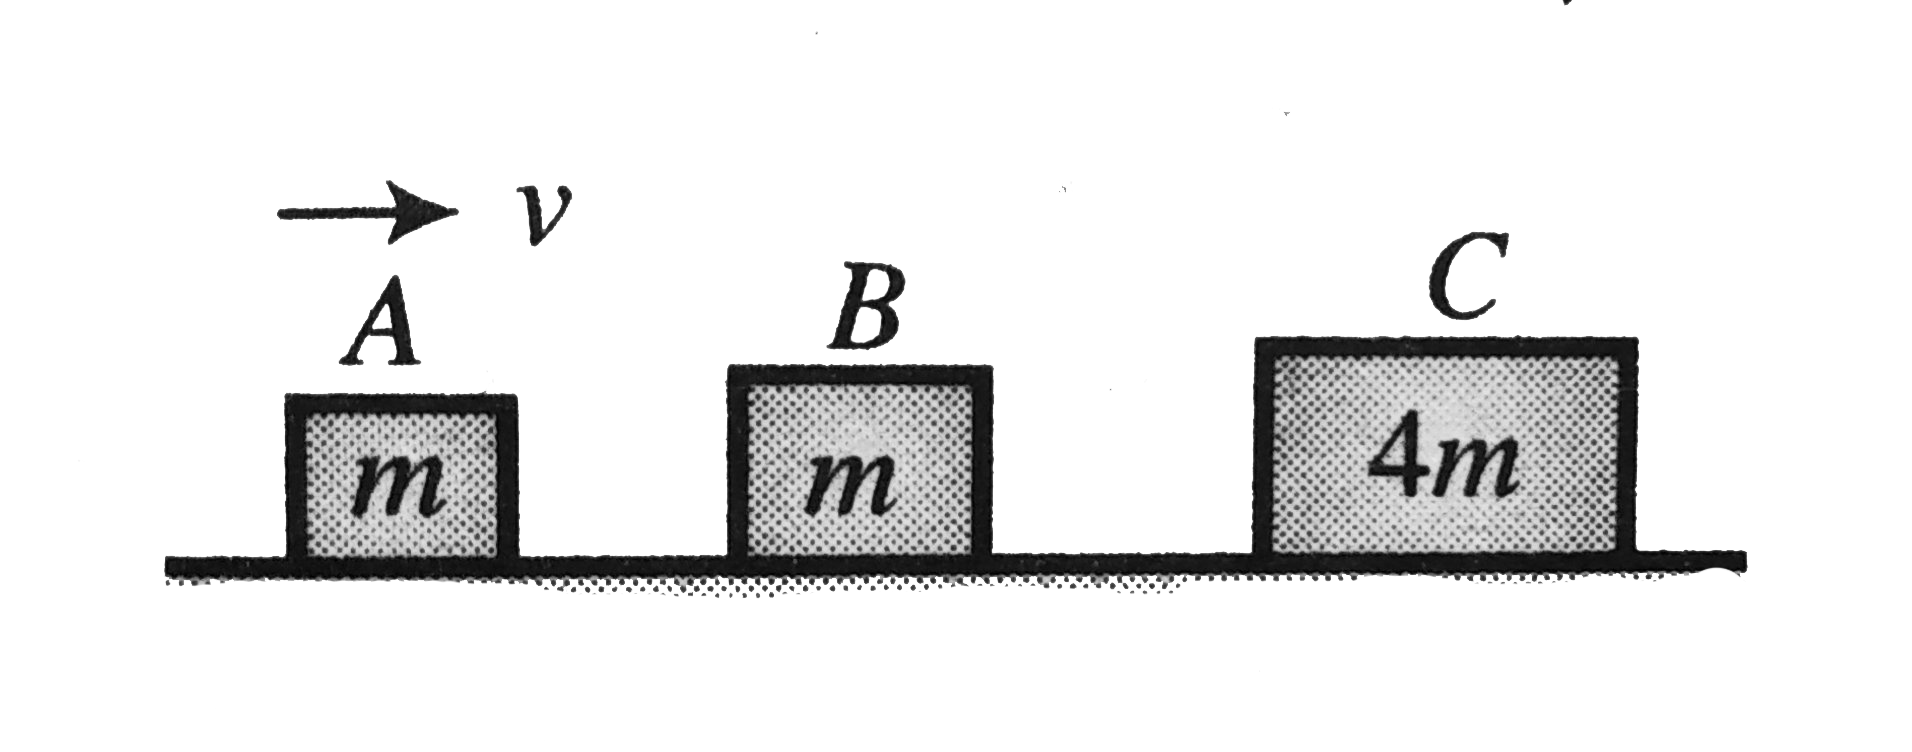 Three blocks are initially placed as shown in the figure. Block A has mass m and initial velocity v to the right. Block B with mass m and block C with mass 4m are both initially at rest. Neglect friction. All collisions are elastic. The final velocity of blocks A is